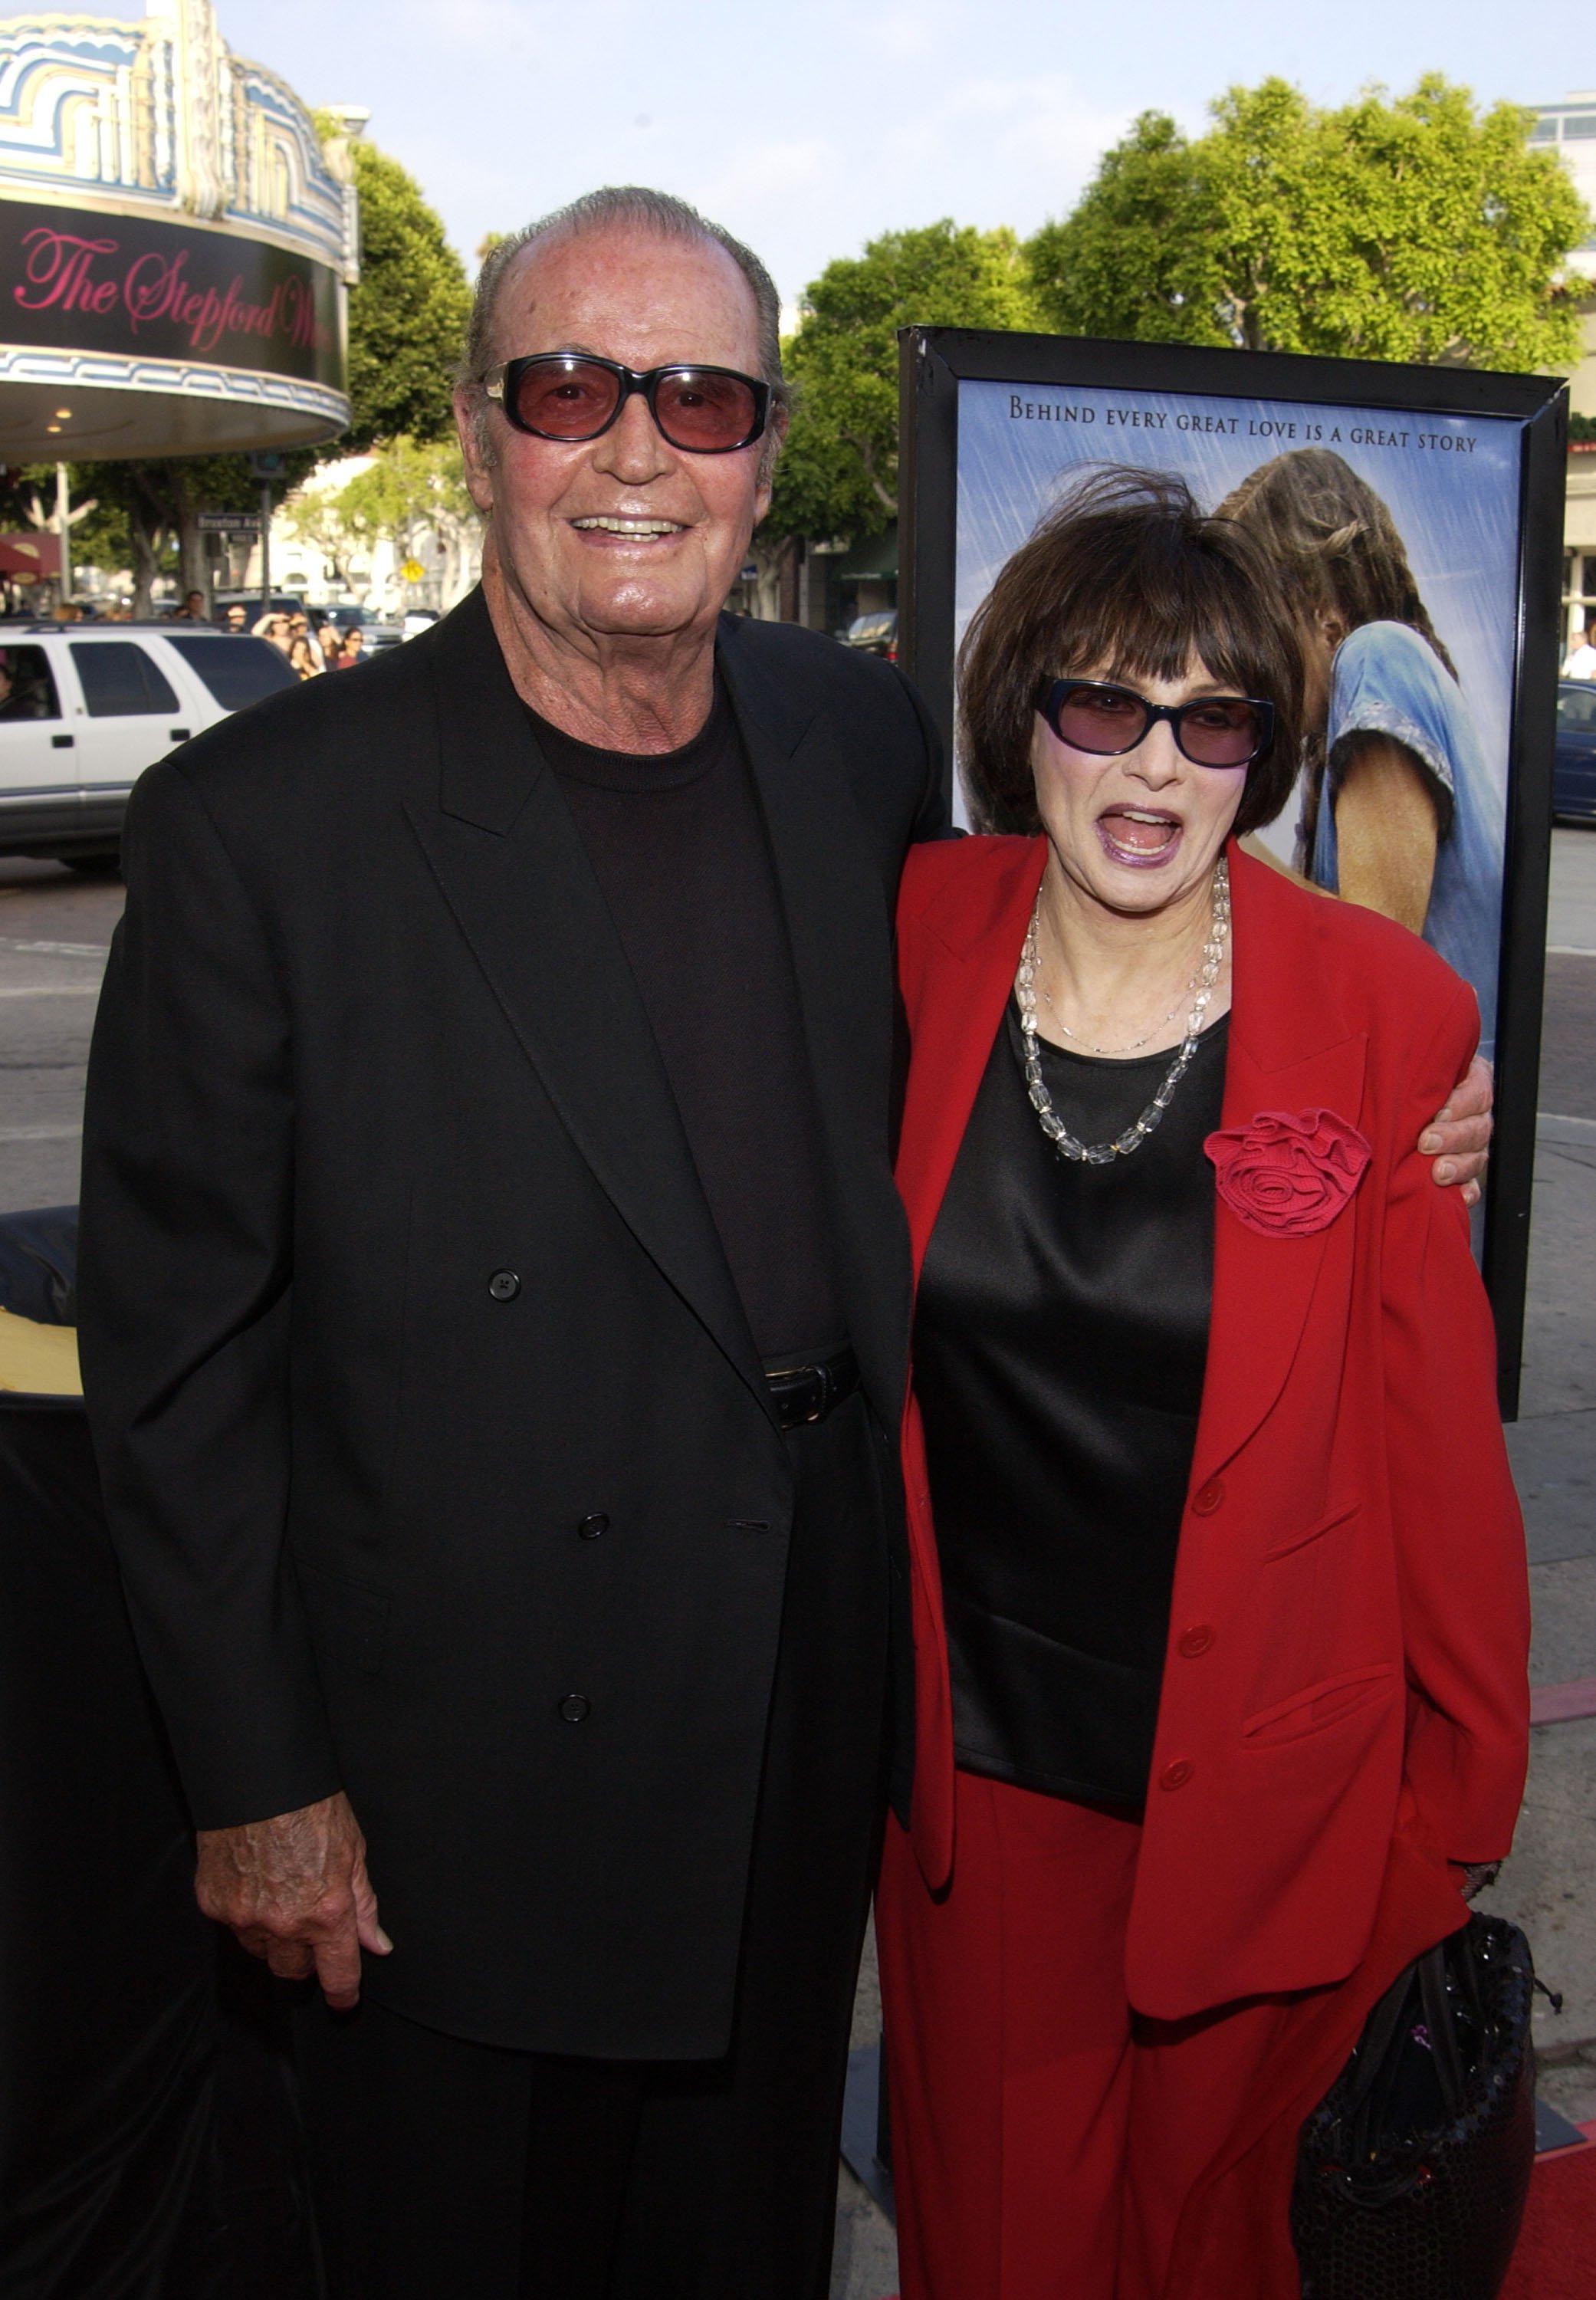 James Garner and Lois Clarke during "The Notebook" New Line Cinema Los Angeles Premiere at Mann Village Theatre in Westwood, California, United States. | Source: Getty Images